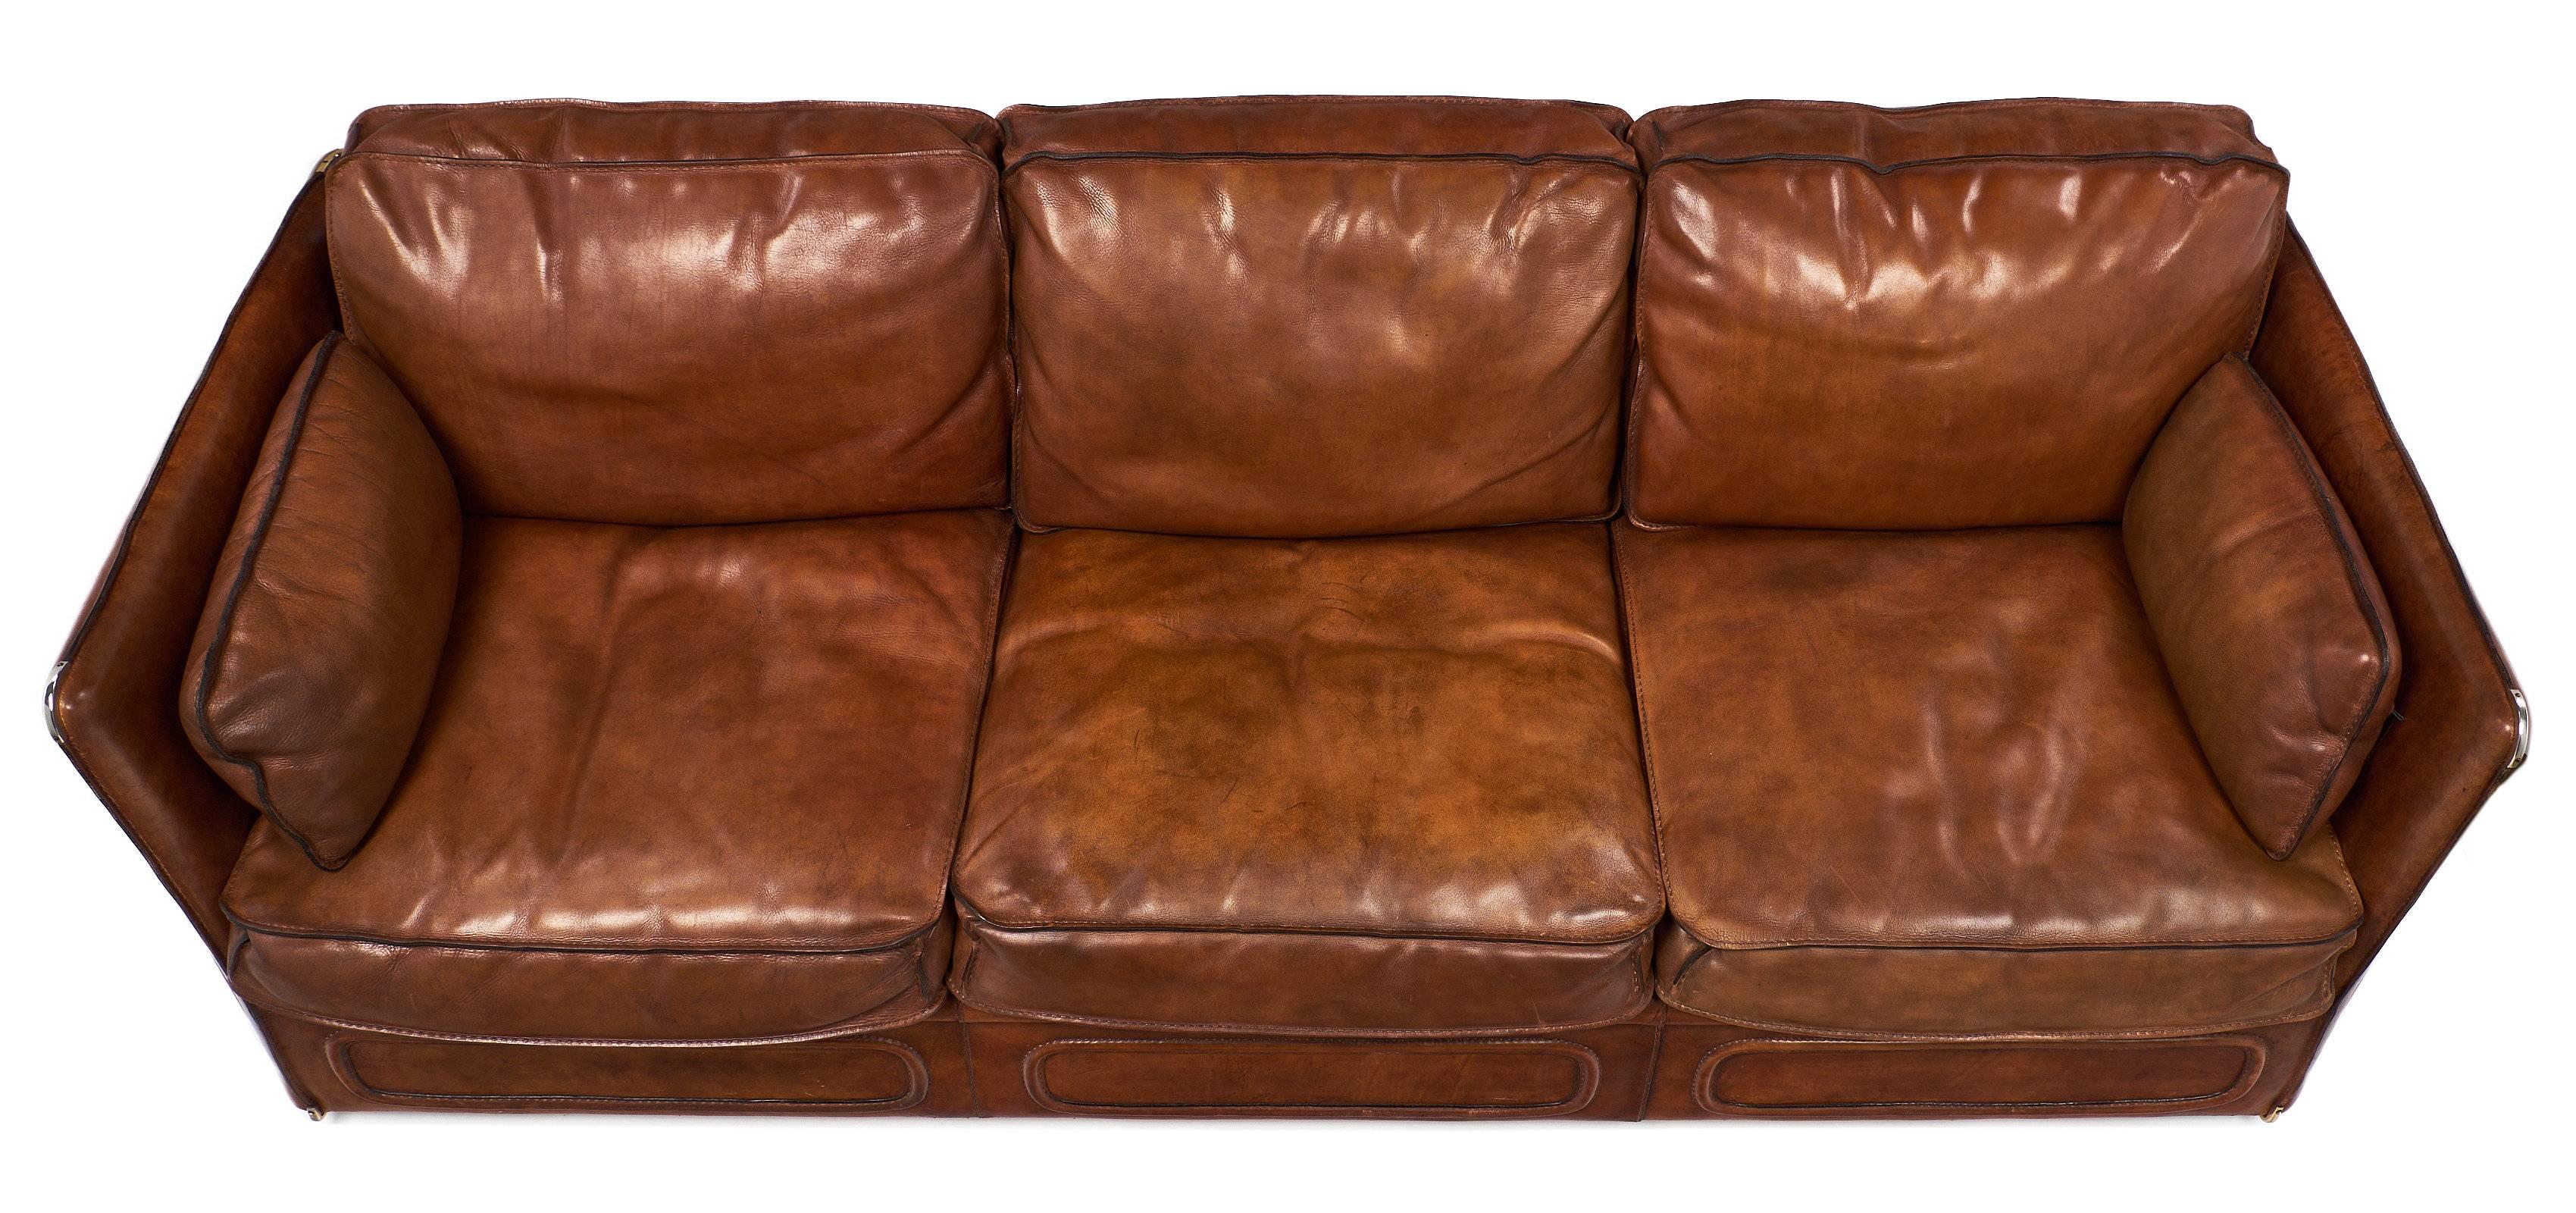 Late 20th Century French Buffalo Leather Equestrian Style Sofa